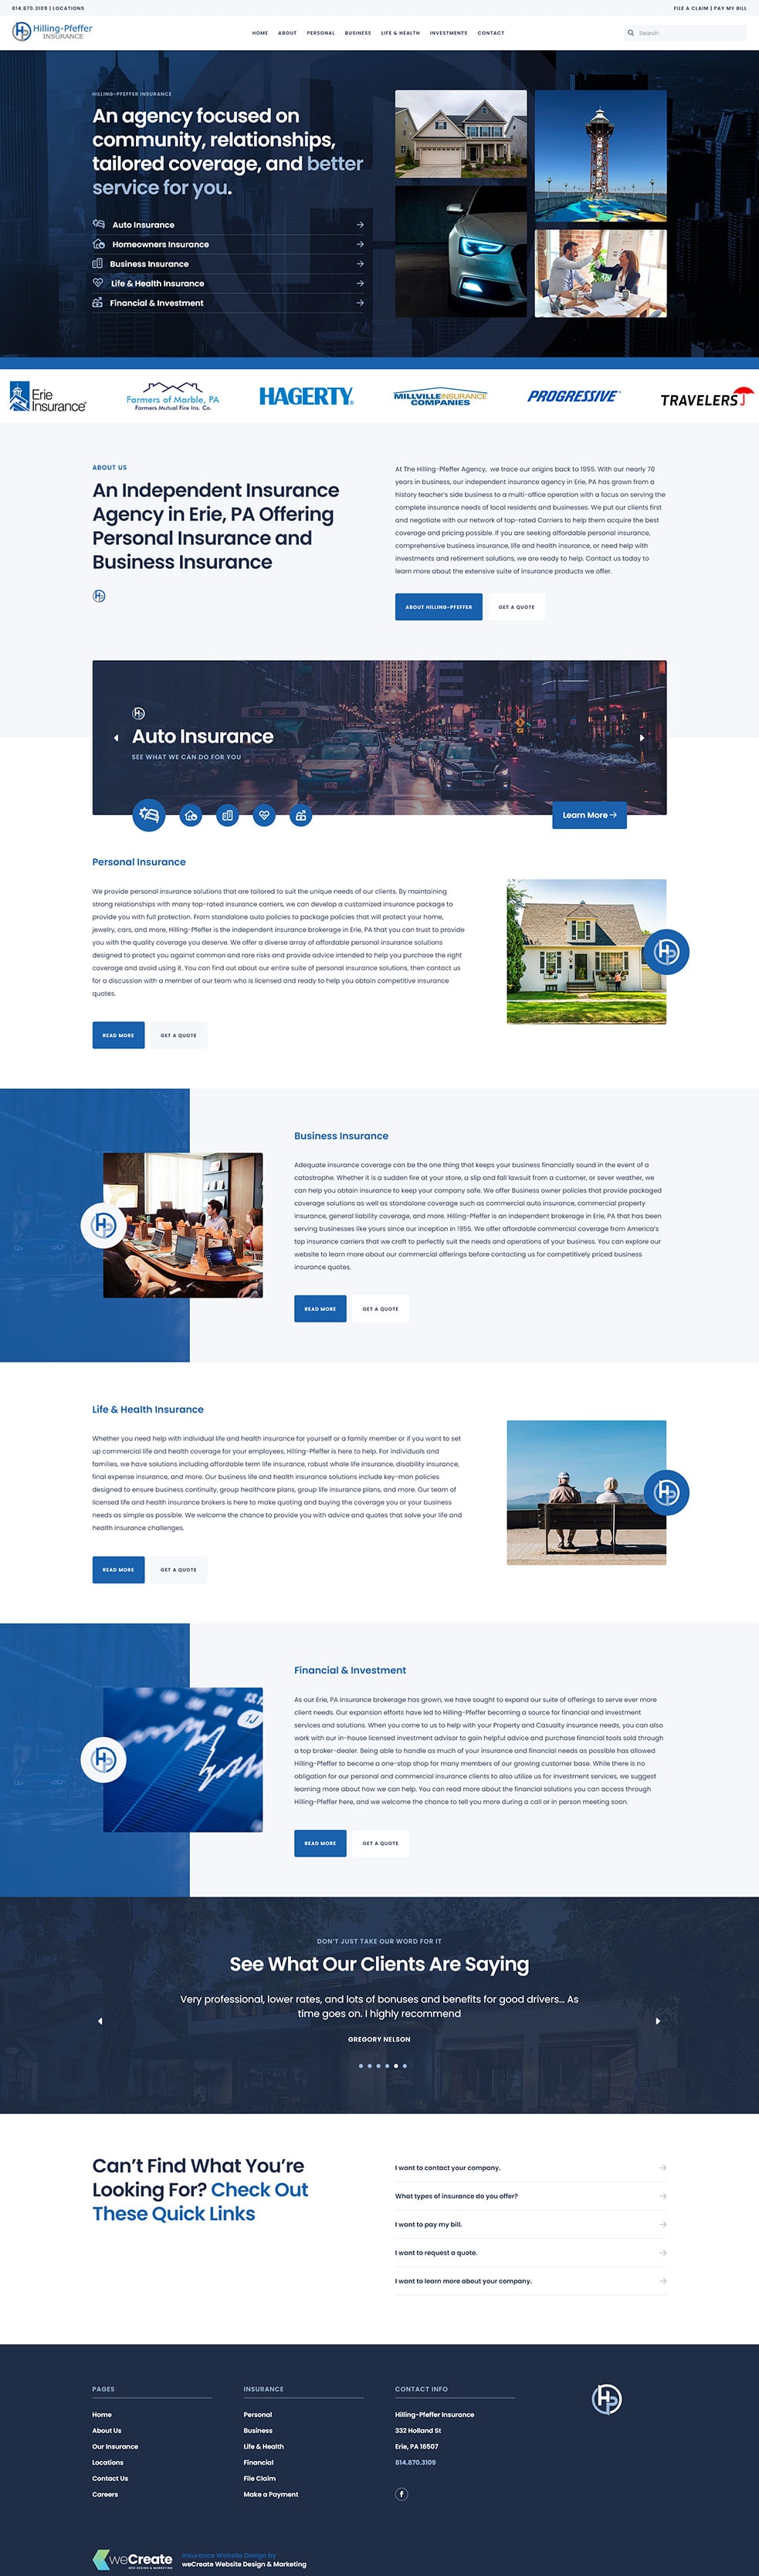 Hilling-Pfeffer Insurance Agency Website Design website preview. Select the visit site button to see this page in your browser